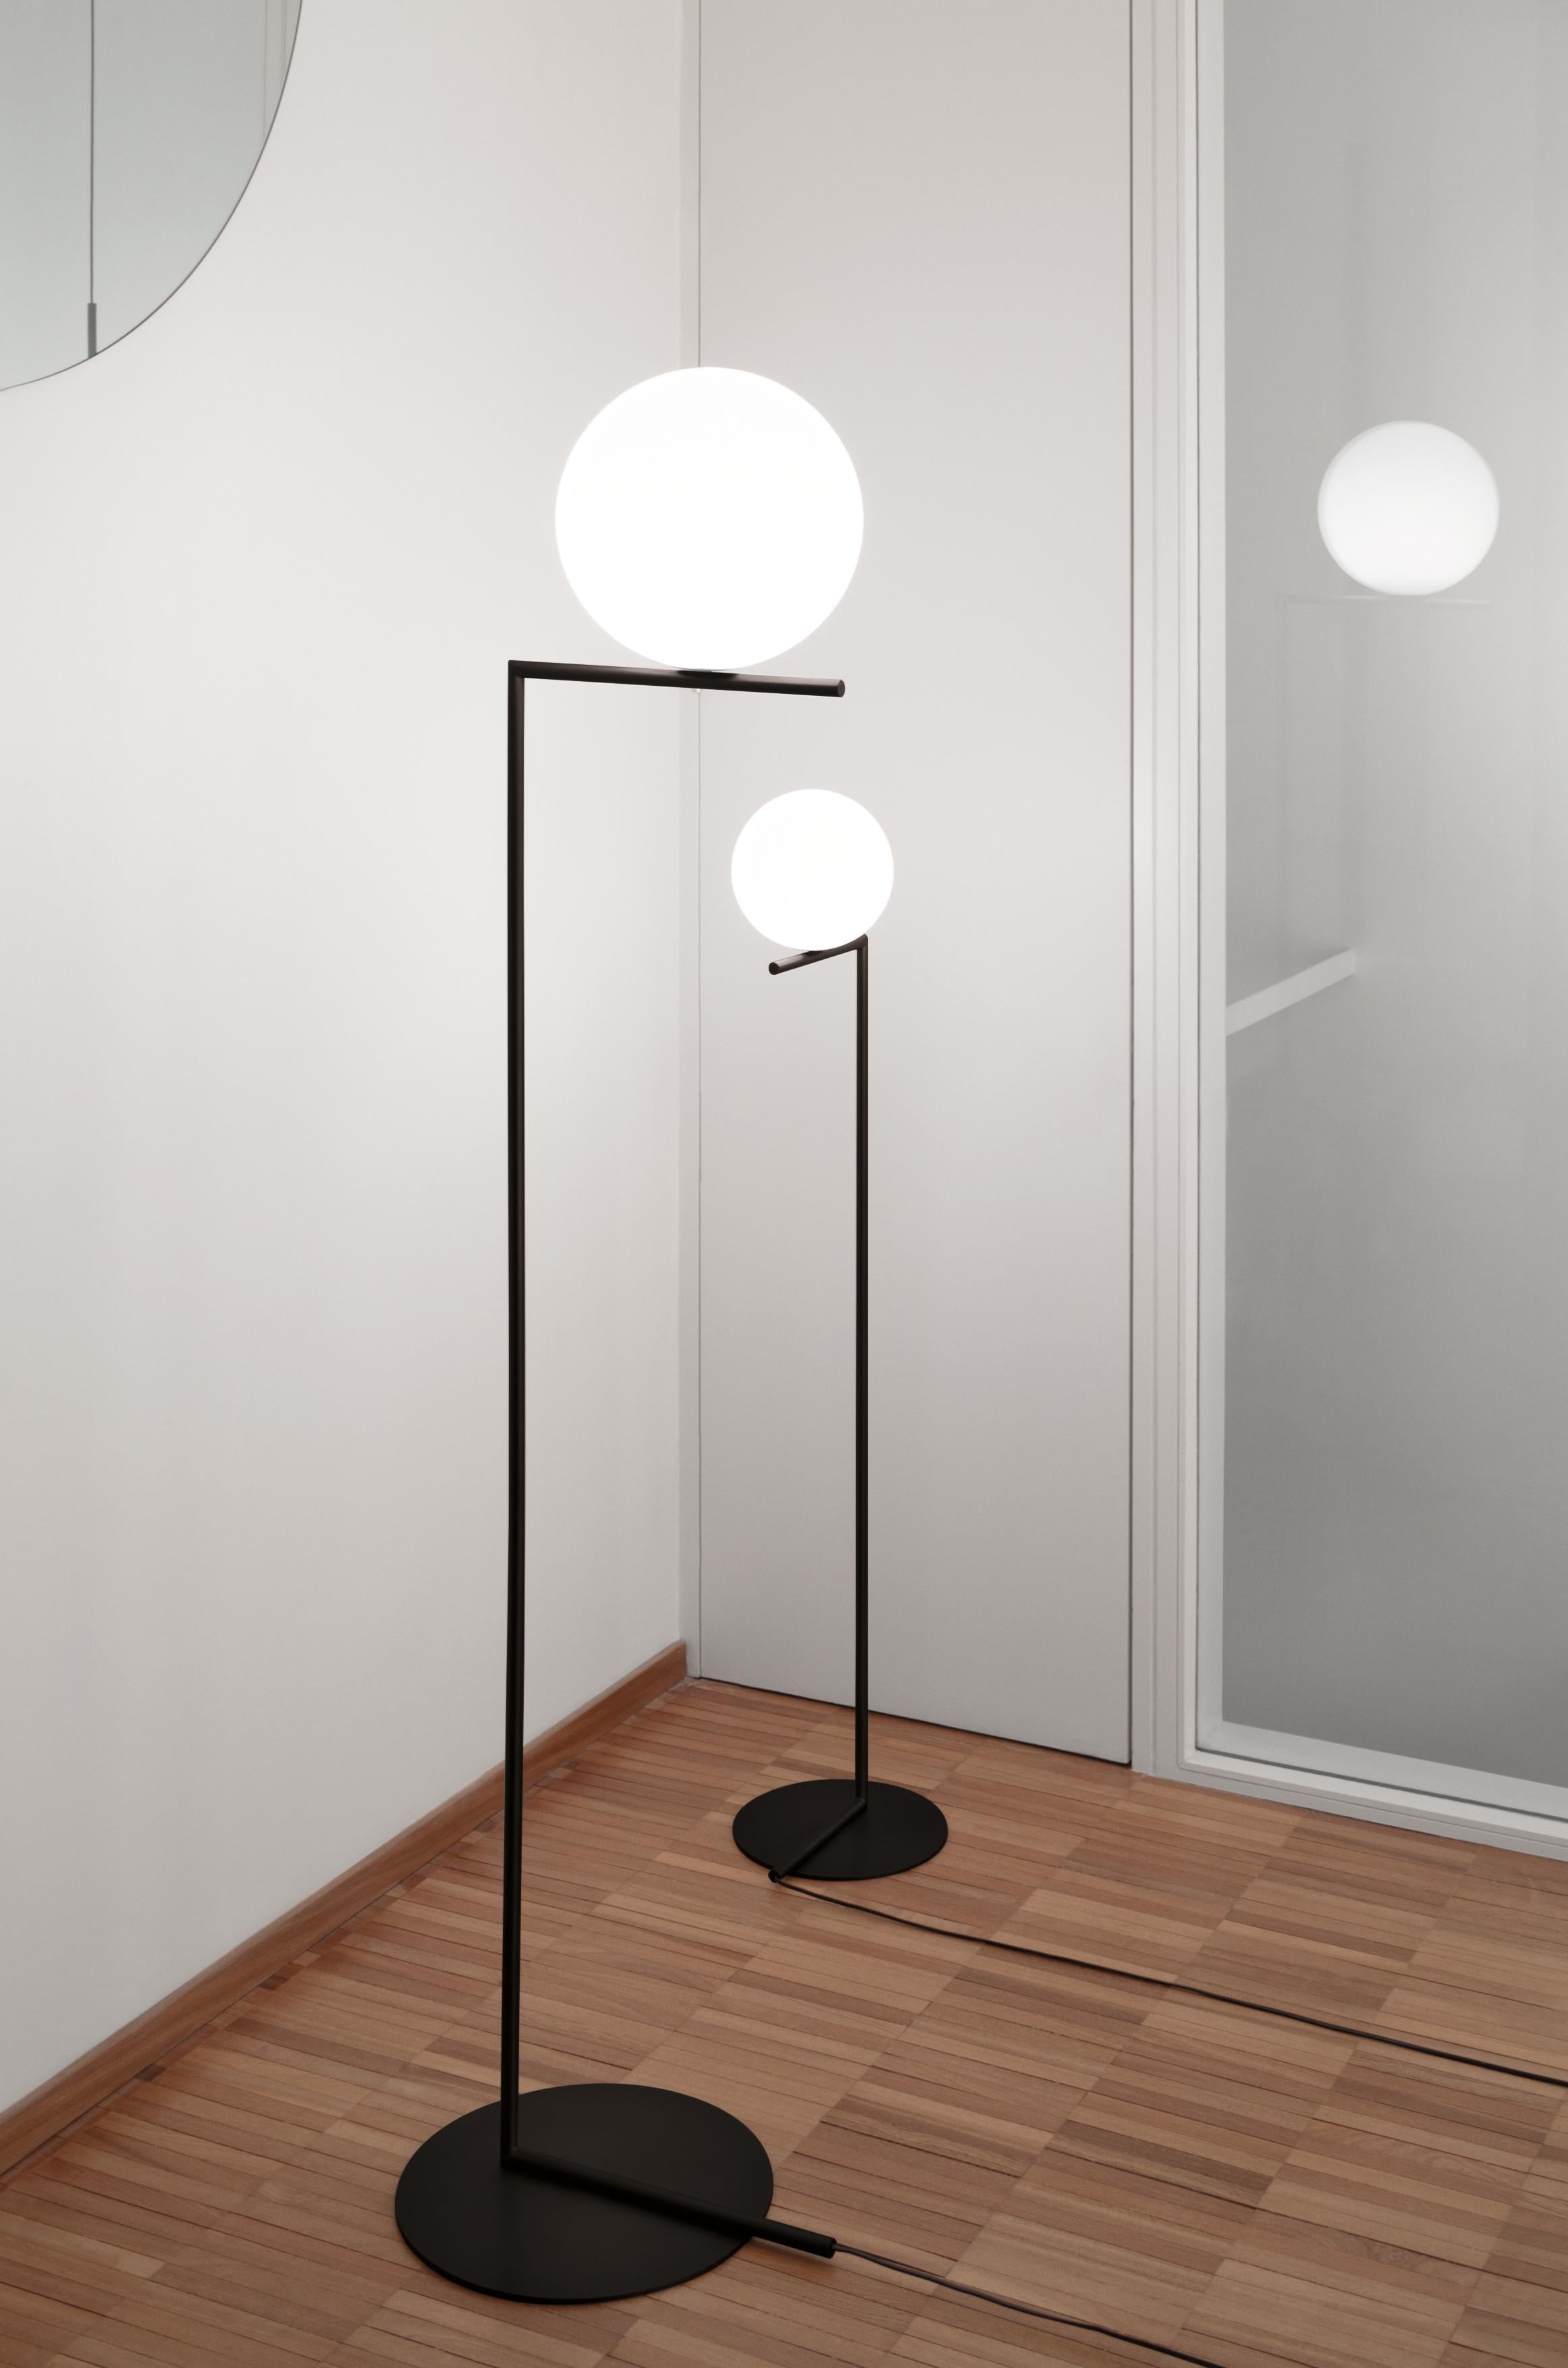 FLOS IC Lights F2 Floor Lamp in Black by Michael Anastassiades

Radiant light, delicate balance: Like the other pieces in his IC Light Series, the IC Lights F floor lamp showcases designer Michael Anastassiades’ love of Industrial simplicity as well